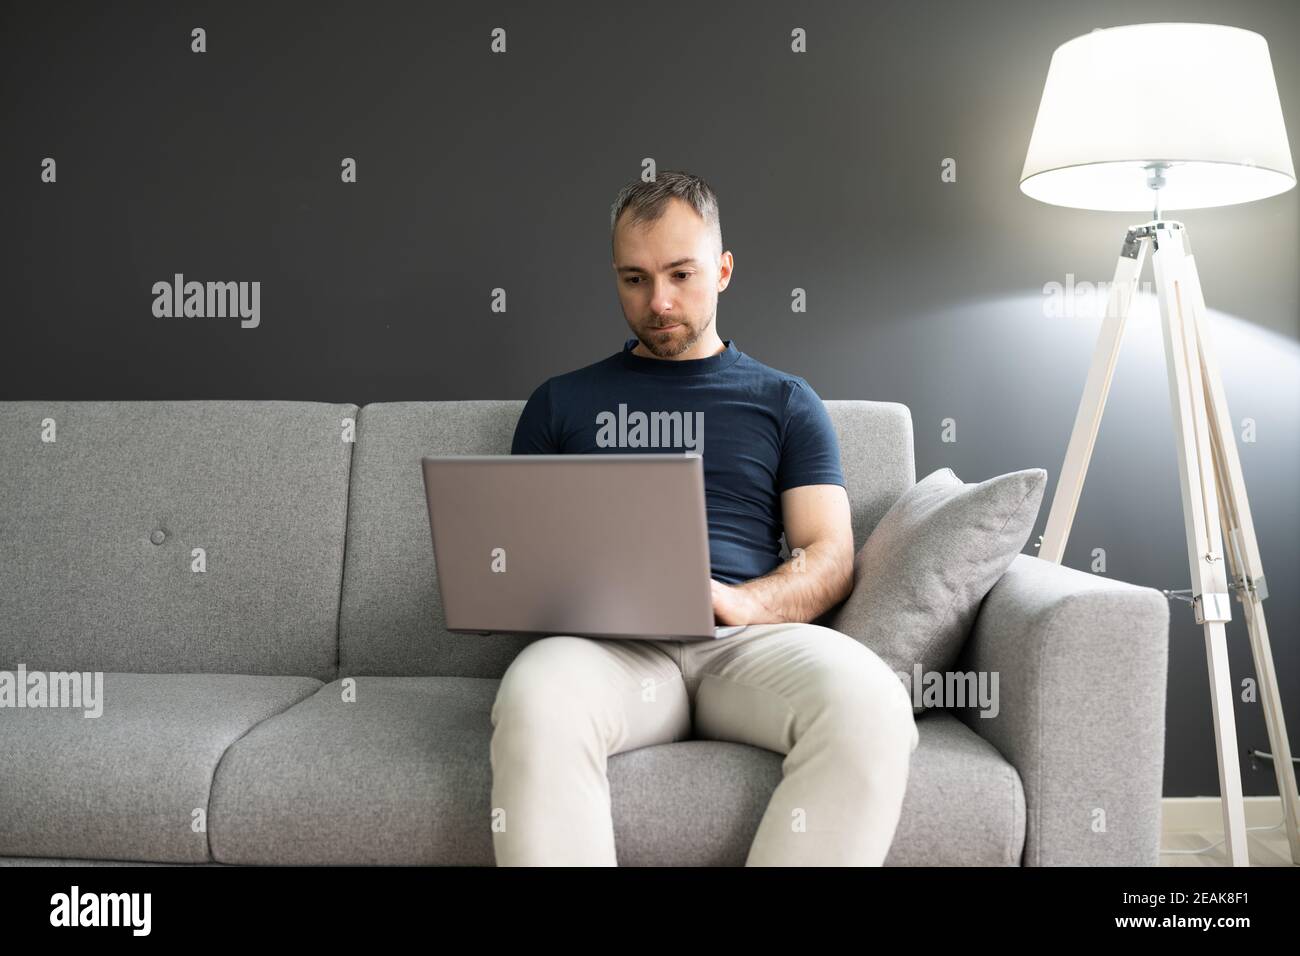 Man Sitting In Sofa And Using Laptop Stock Photo